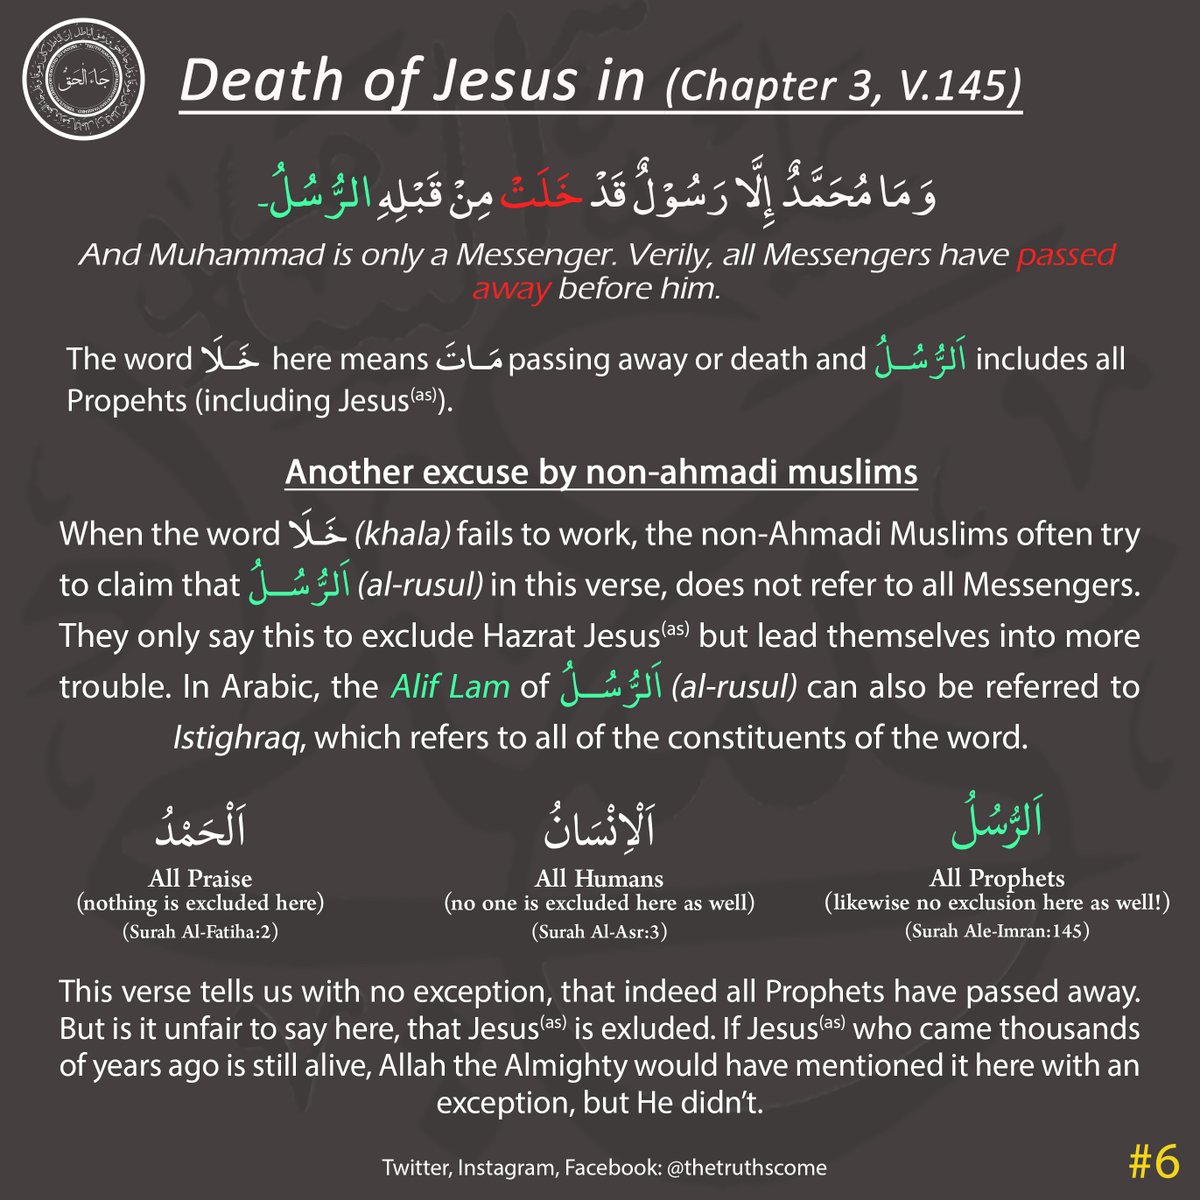 Another excuse by non-Ahmadi Muslims is, that they try to exclude Jesus(as) from this verse by saying, that Al-Rusul doesn't mean all Prophets. However "Al-Rusul" includes all Prophets without exception. In fact, Allah has used the same Arabic in Ch.5 v.76 referring to Jesus(as).